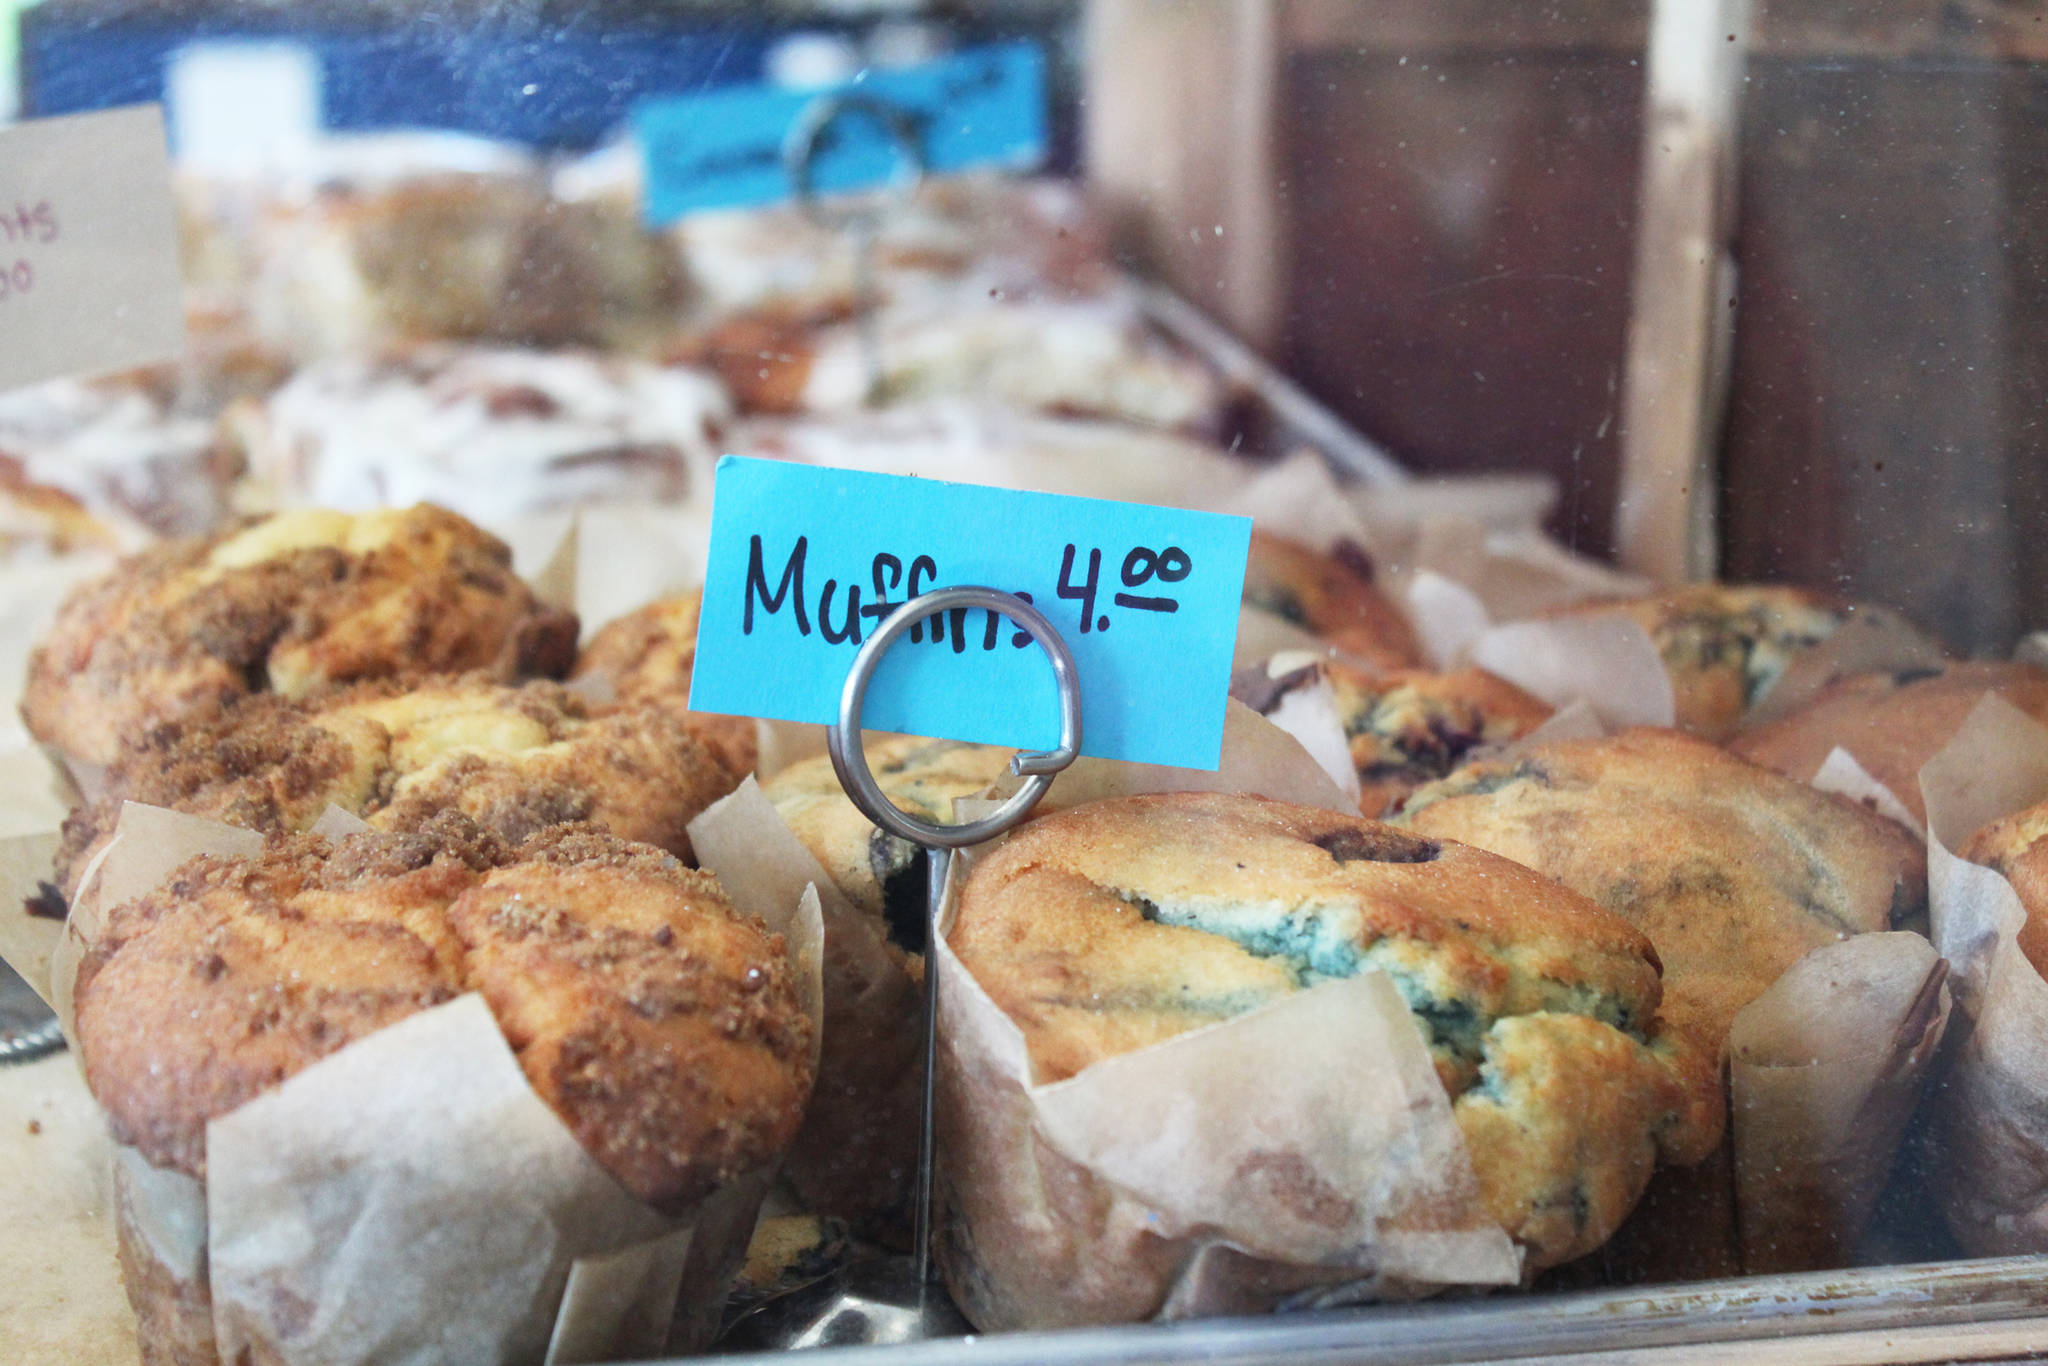 Muffins wait to be bought and eaten inside Blue Sunshine Bakery and Cafe, a new Homer establishment, on Tuesday, June 12, 2018 in Homer, Alaska. (Photo by Megan Pacer/Homer News)